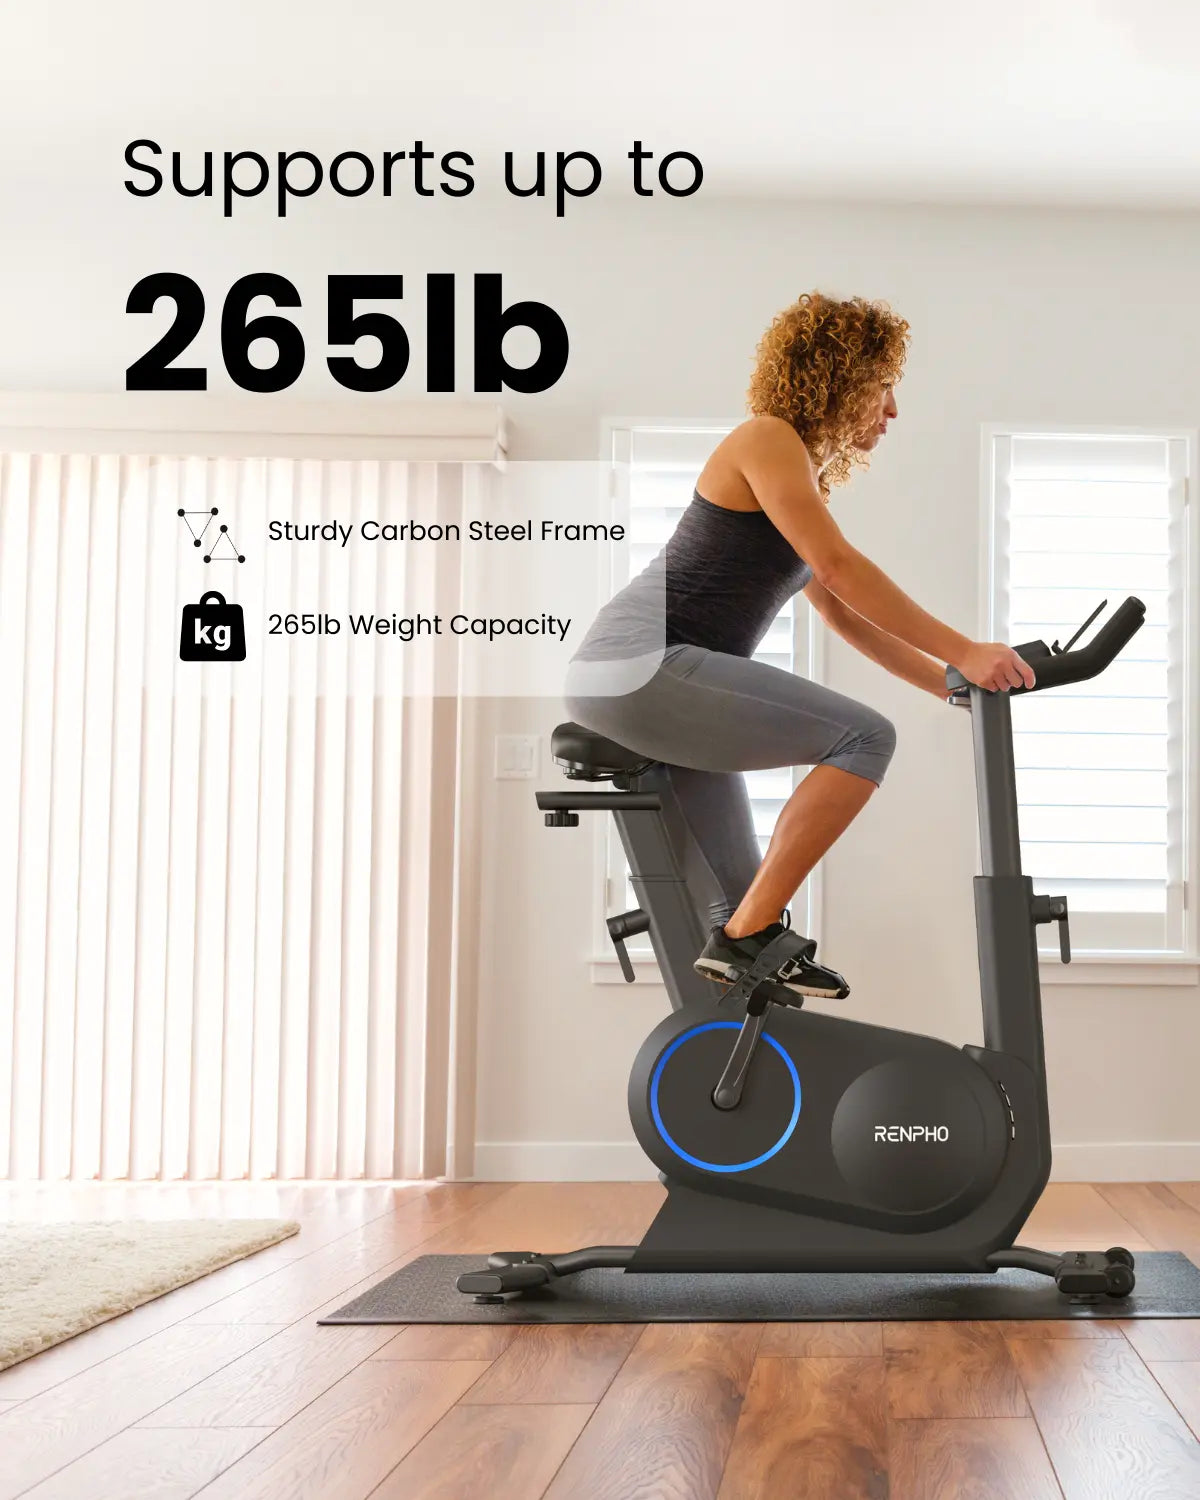 A woman rides a Renpho EU AI Smart Bike S in a bright room with white walls and a window. Overlay text reads "Supports up to 265lb" and includes icons for "Sturdy Carbon Steel Frame" and "265lb Weight Capacity." The black bike, with blue accents, offers an immersive fitness experience with diverse training programs.